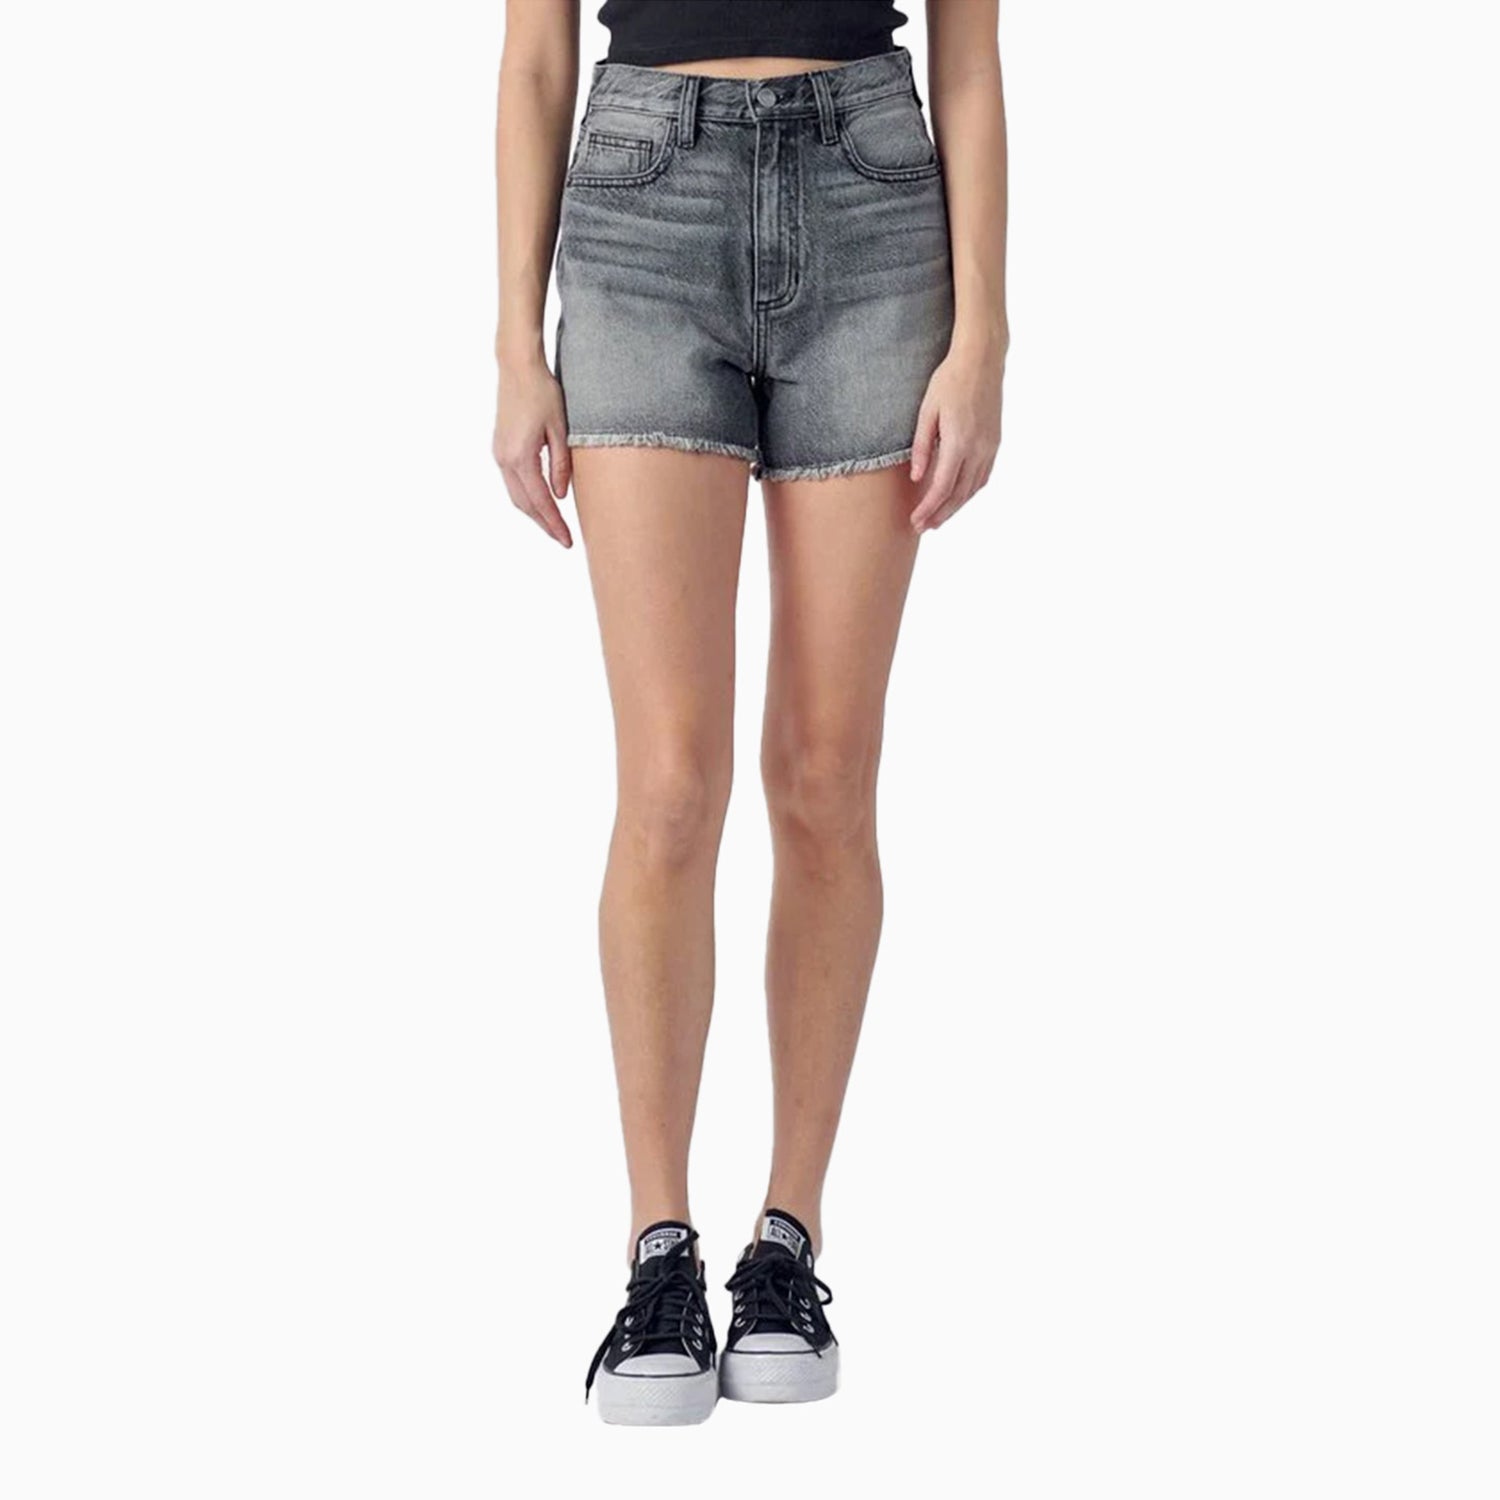 cello-jeans-womens-easy-high-rise-mom-denim-shorts-wv48309gry